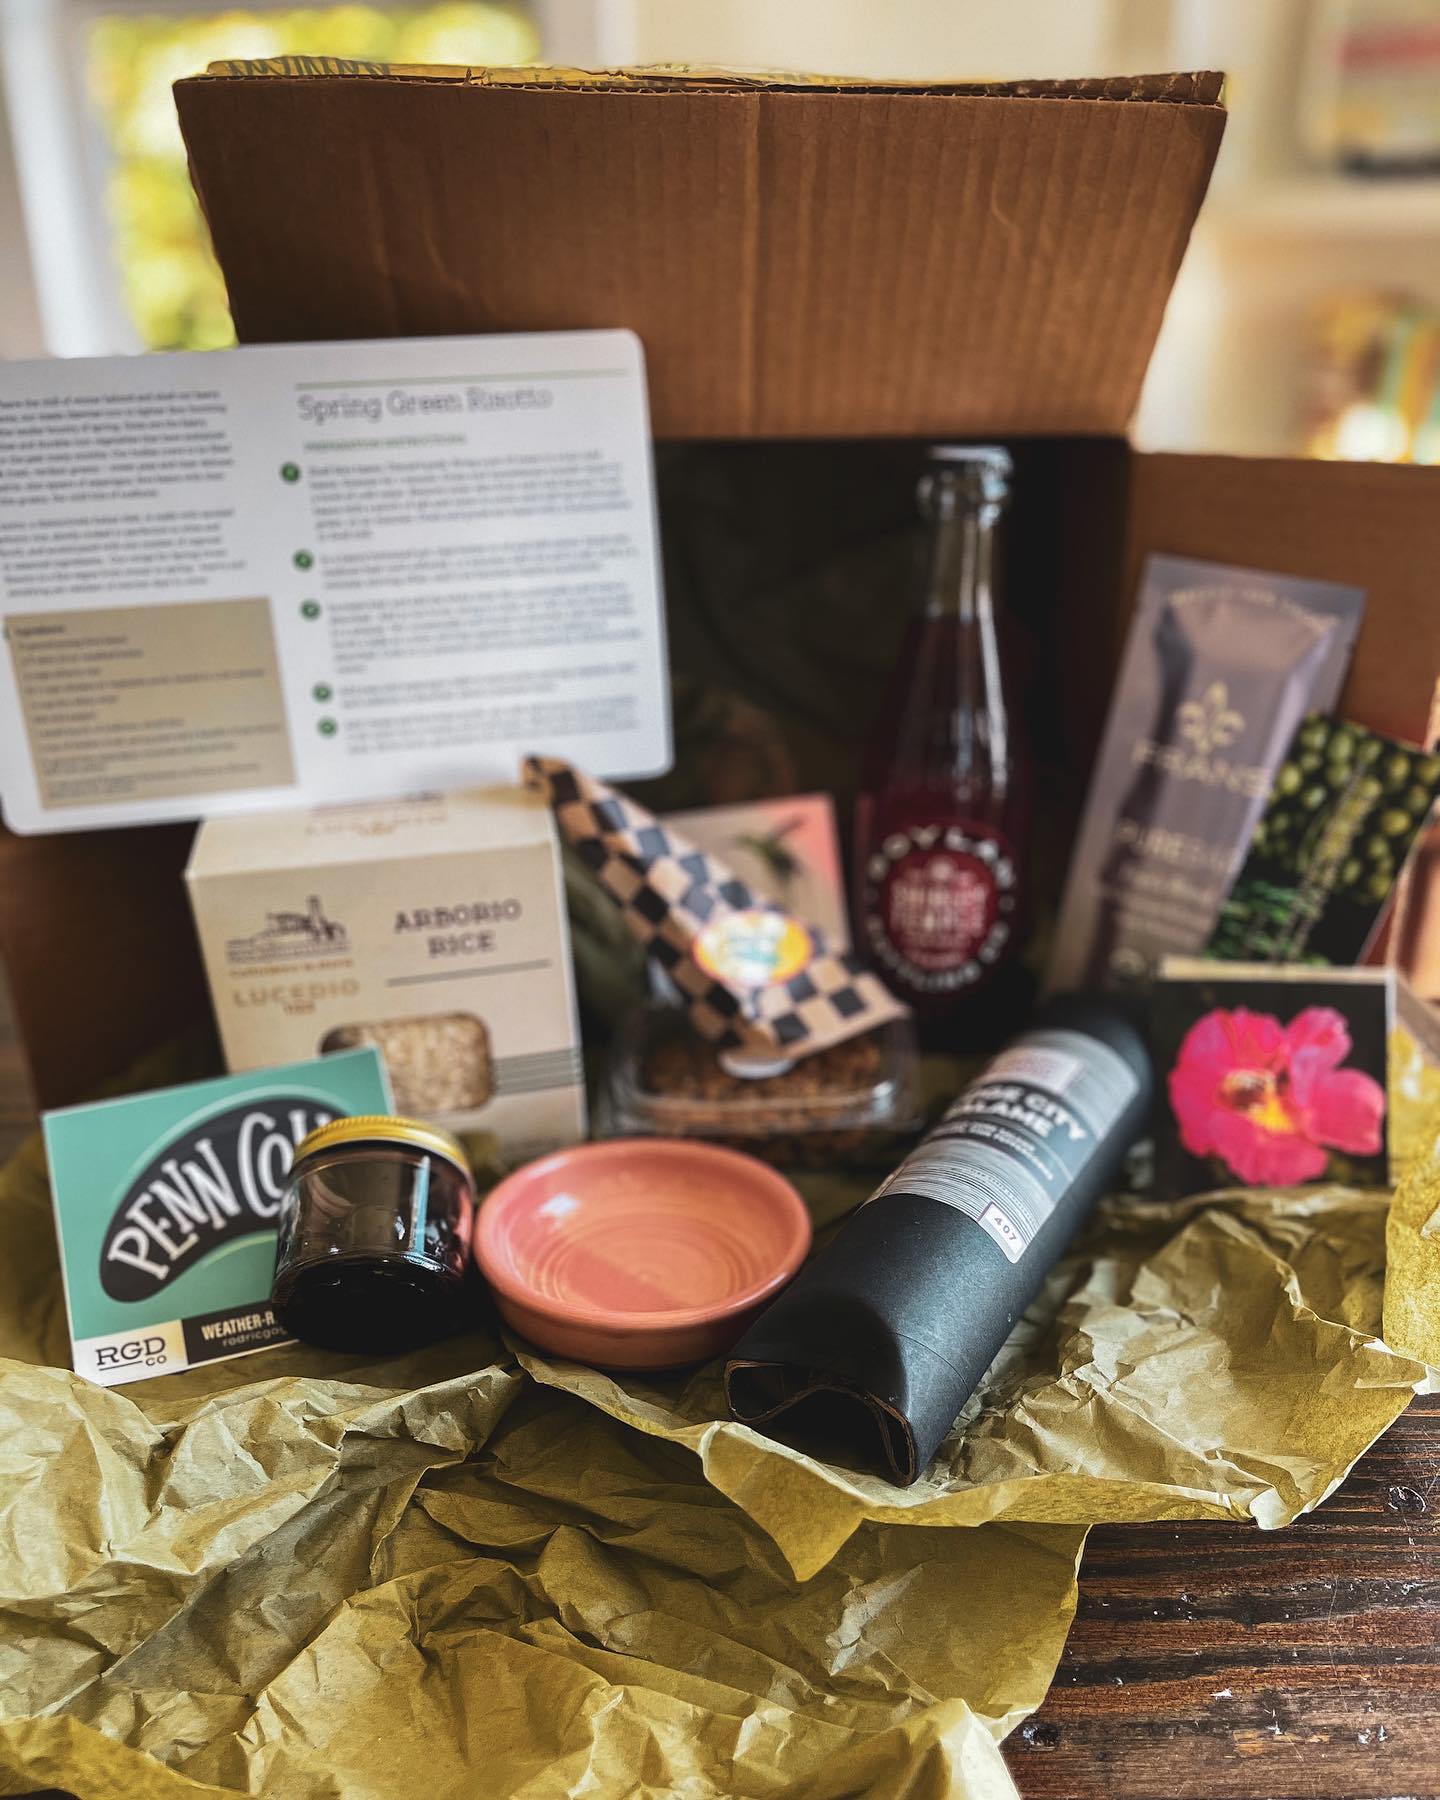 12 Days of Christmas gifts, The Seasonal Subscription Box at bayleaf in Coupeville Washington.